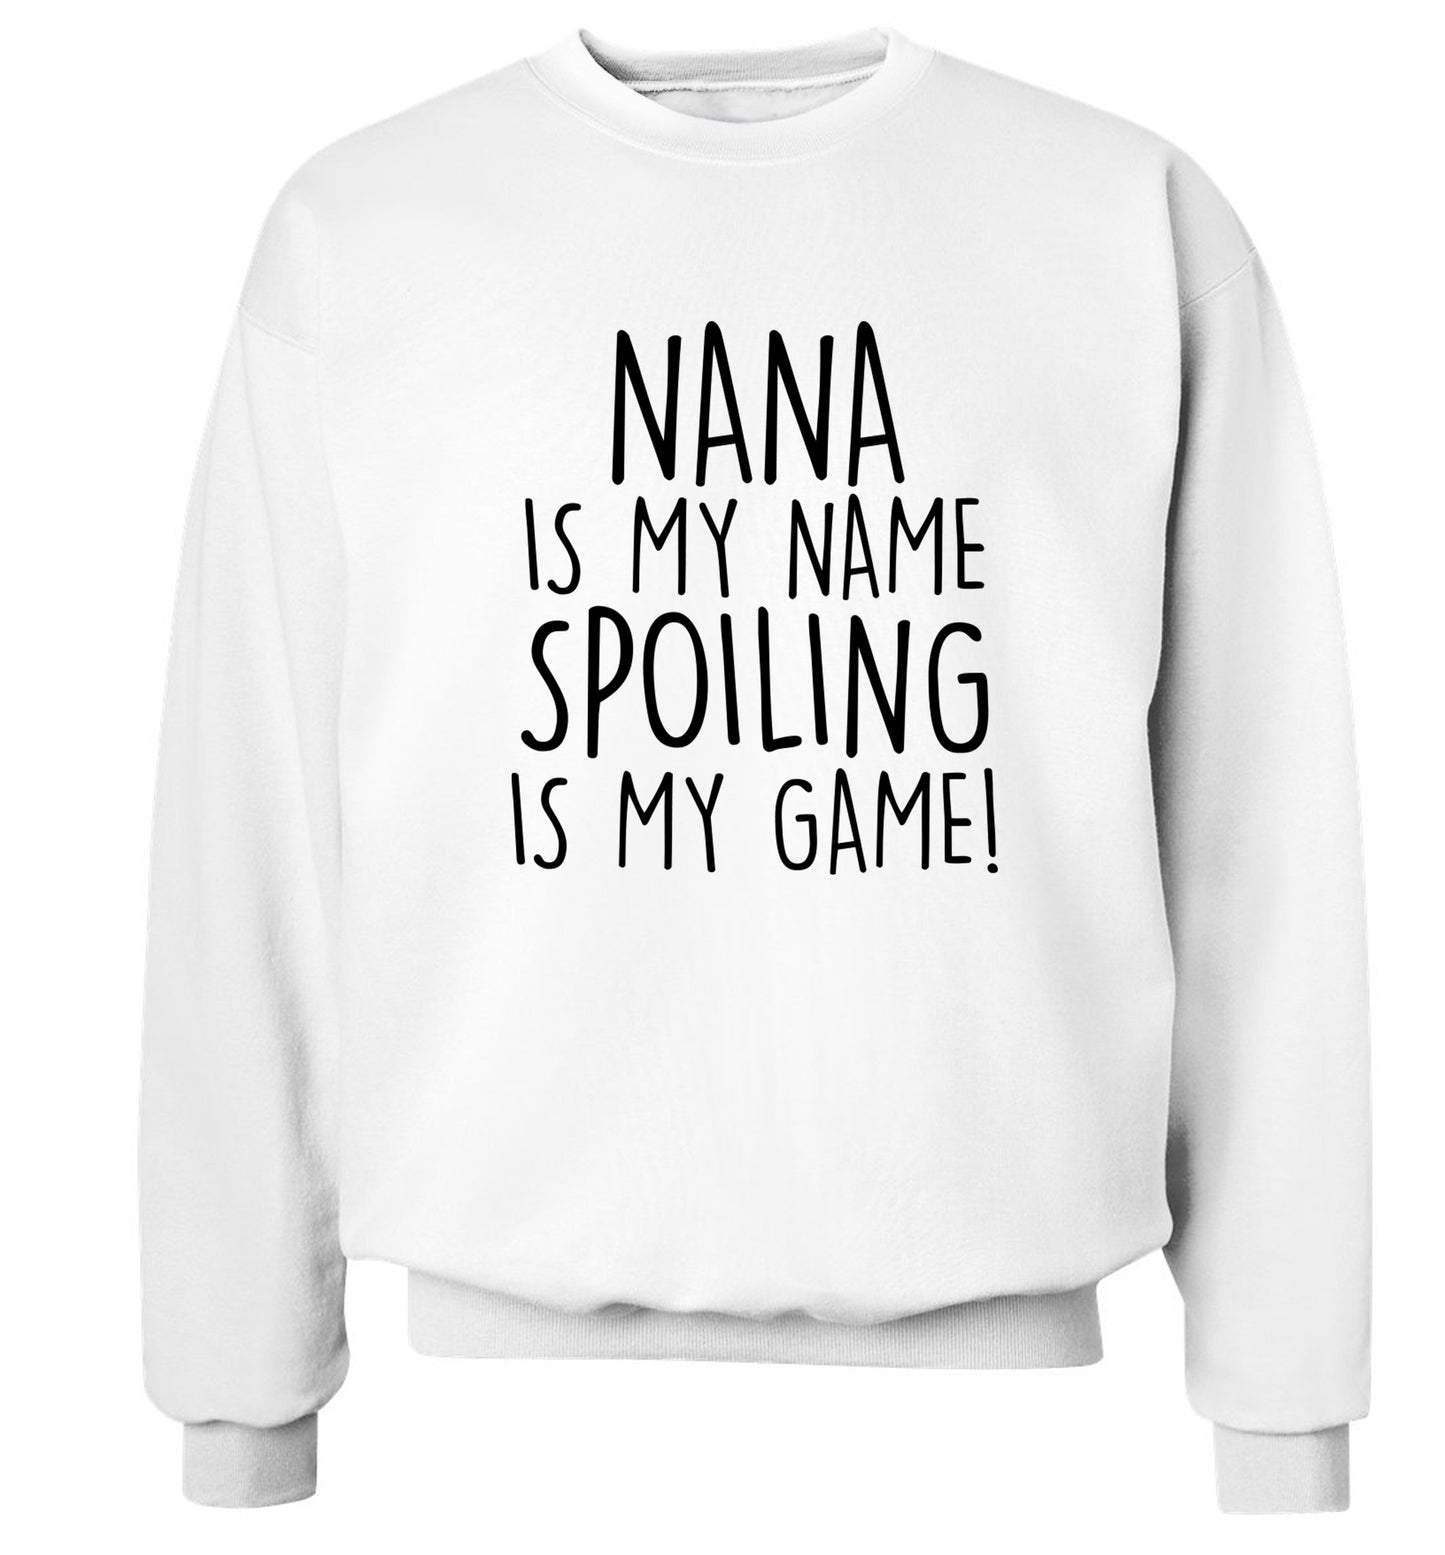 Nana is my name, spoiling is my game Adult's unisex white Sweater 2XL